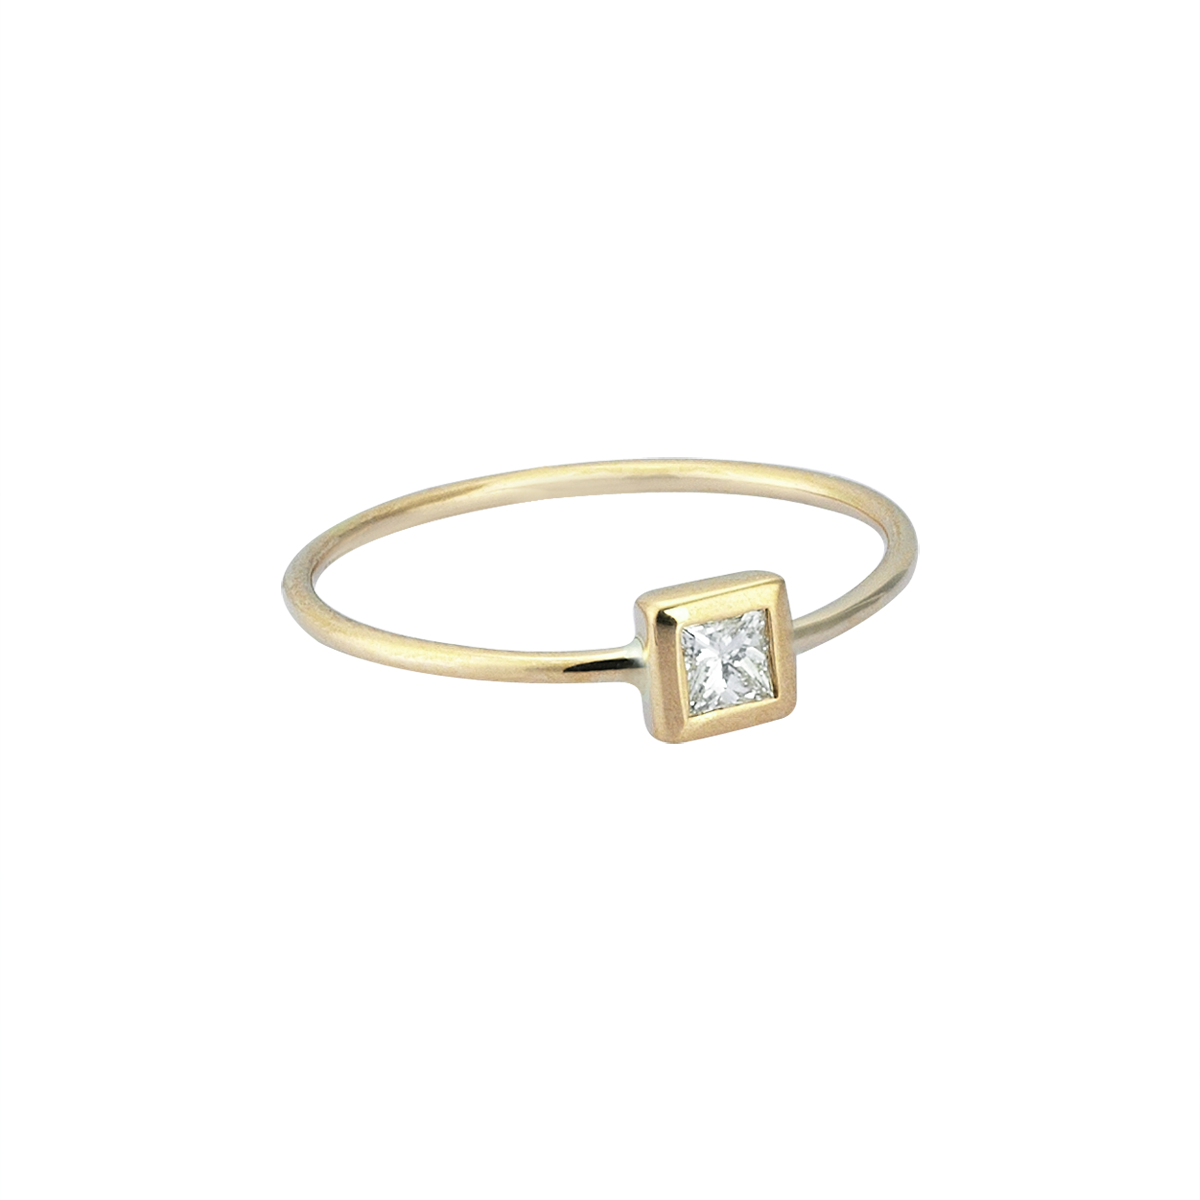 Square Diamond Midi Ring in Yellow Gold - Her Story Shop